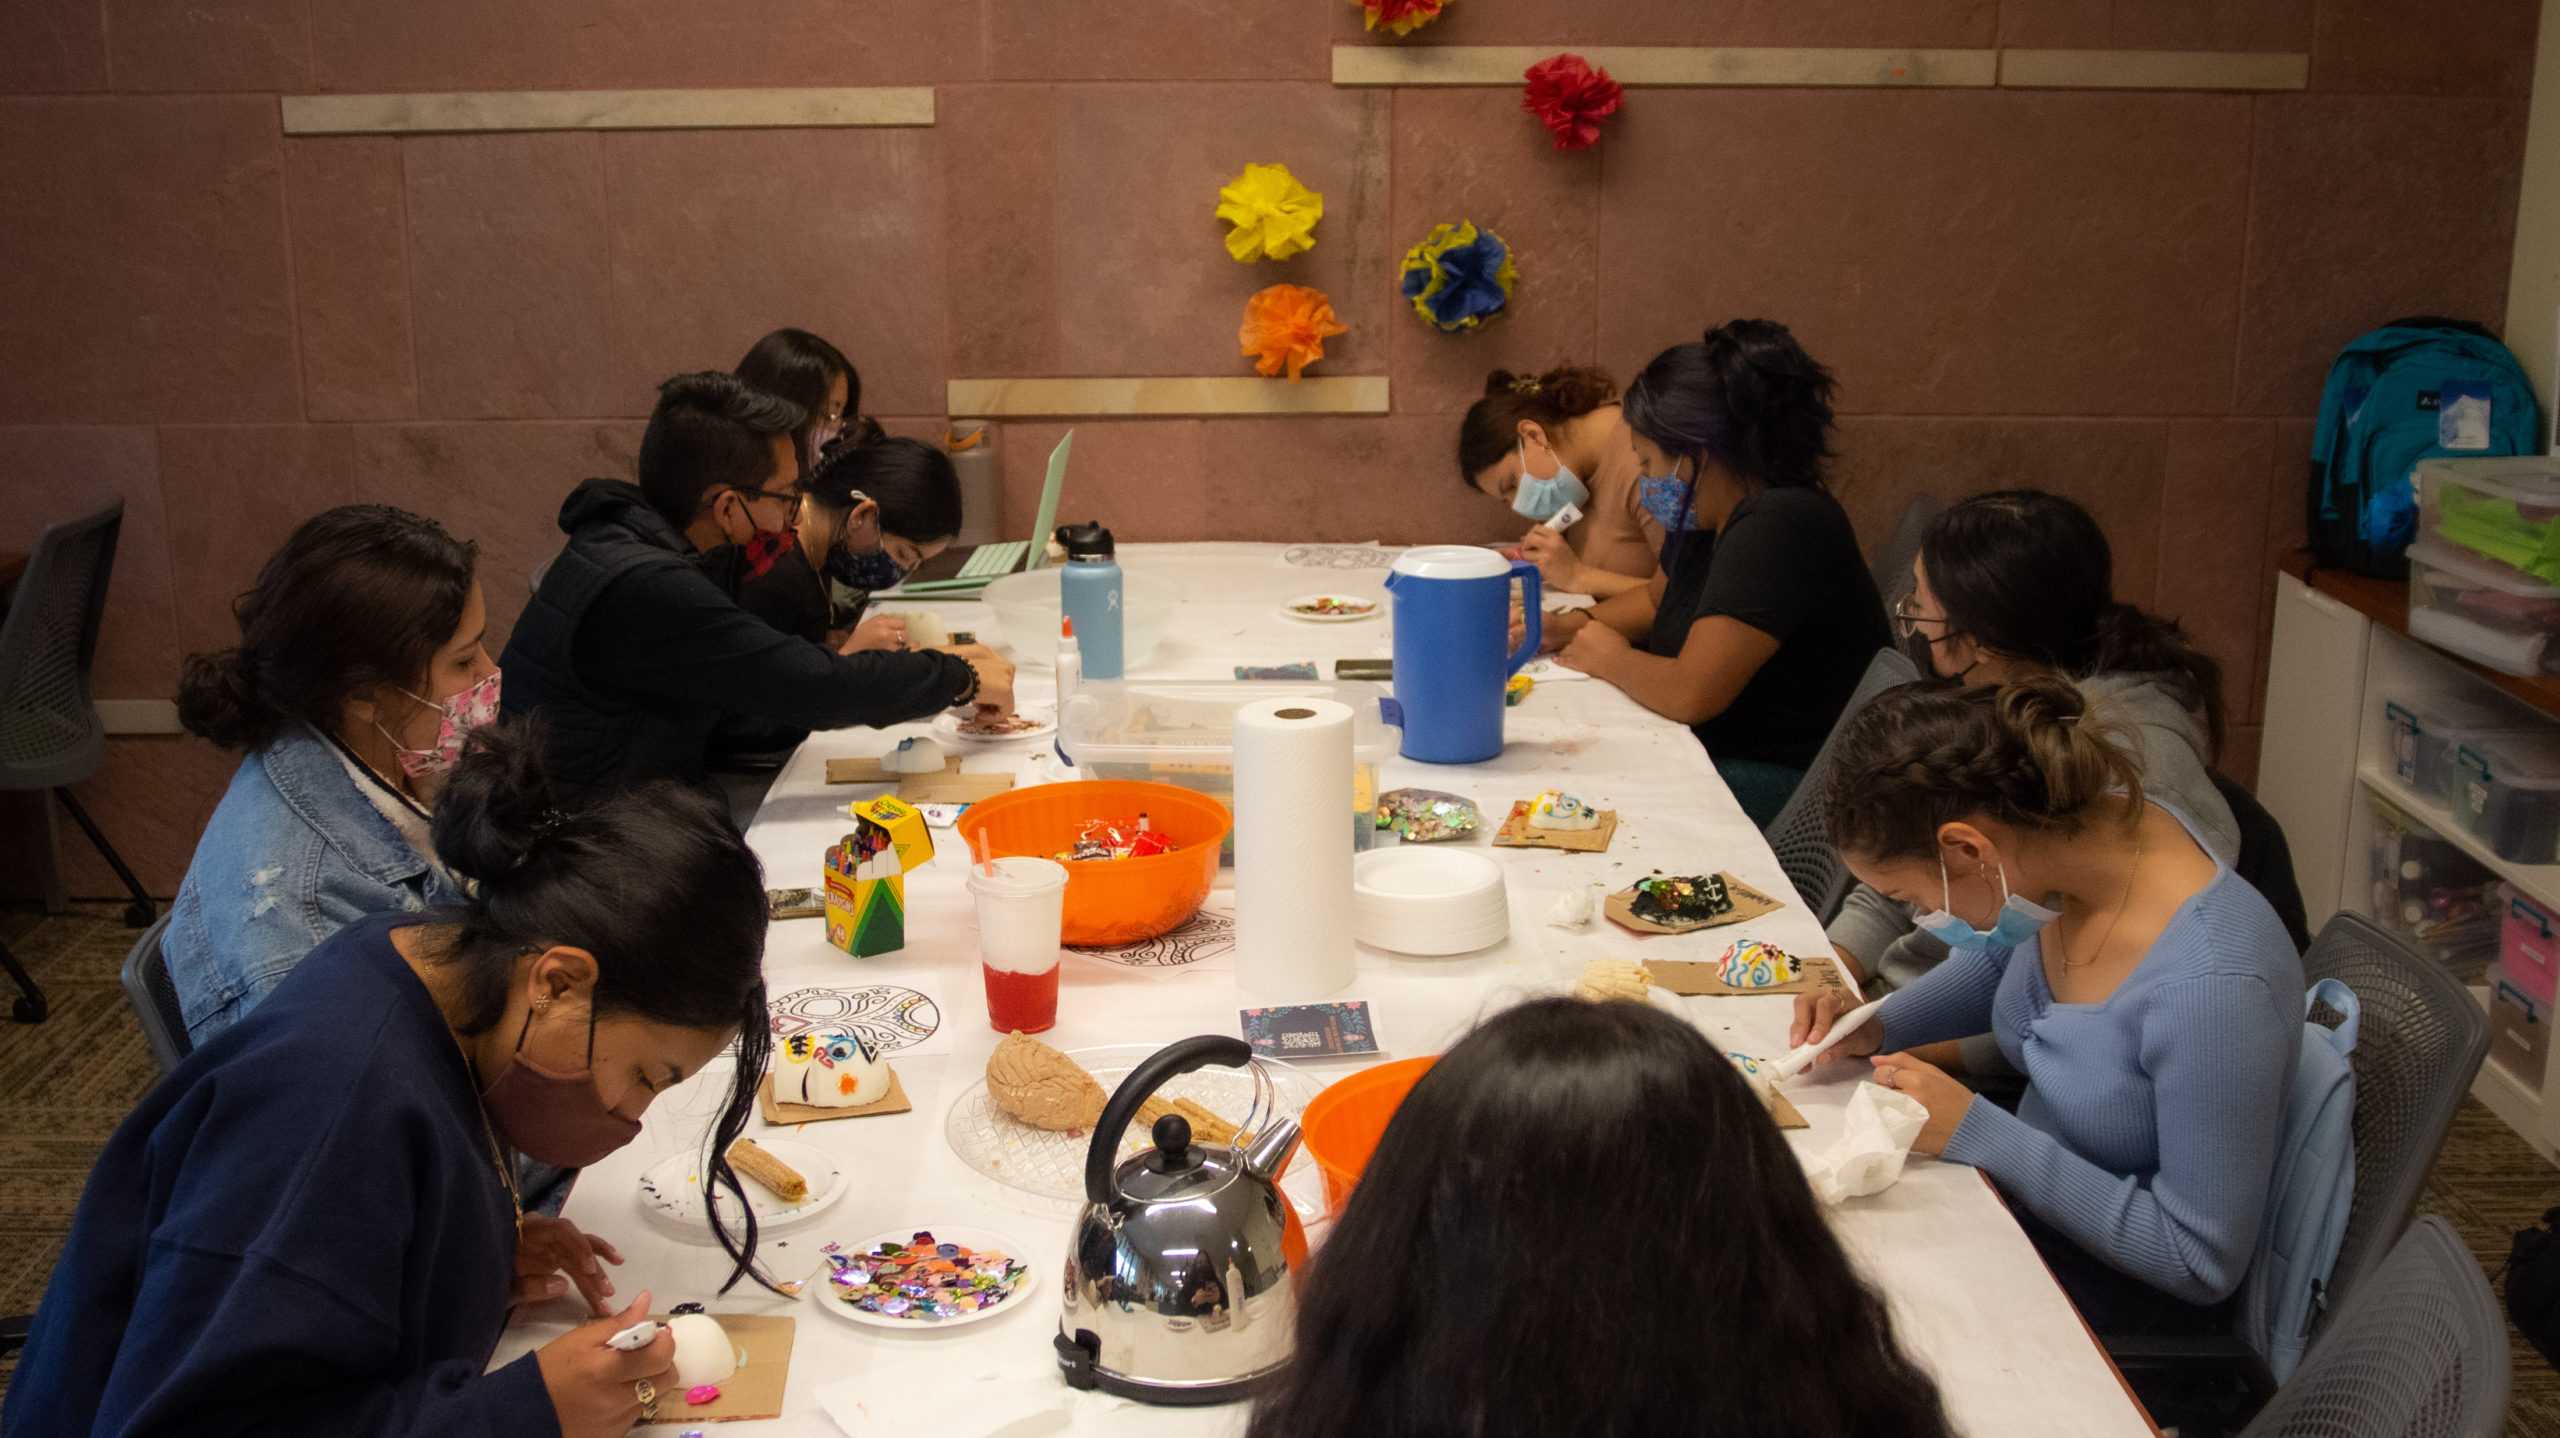 Students at El Centro decorates sugar skulls for Day of the Dead